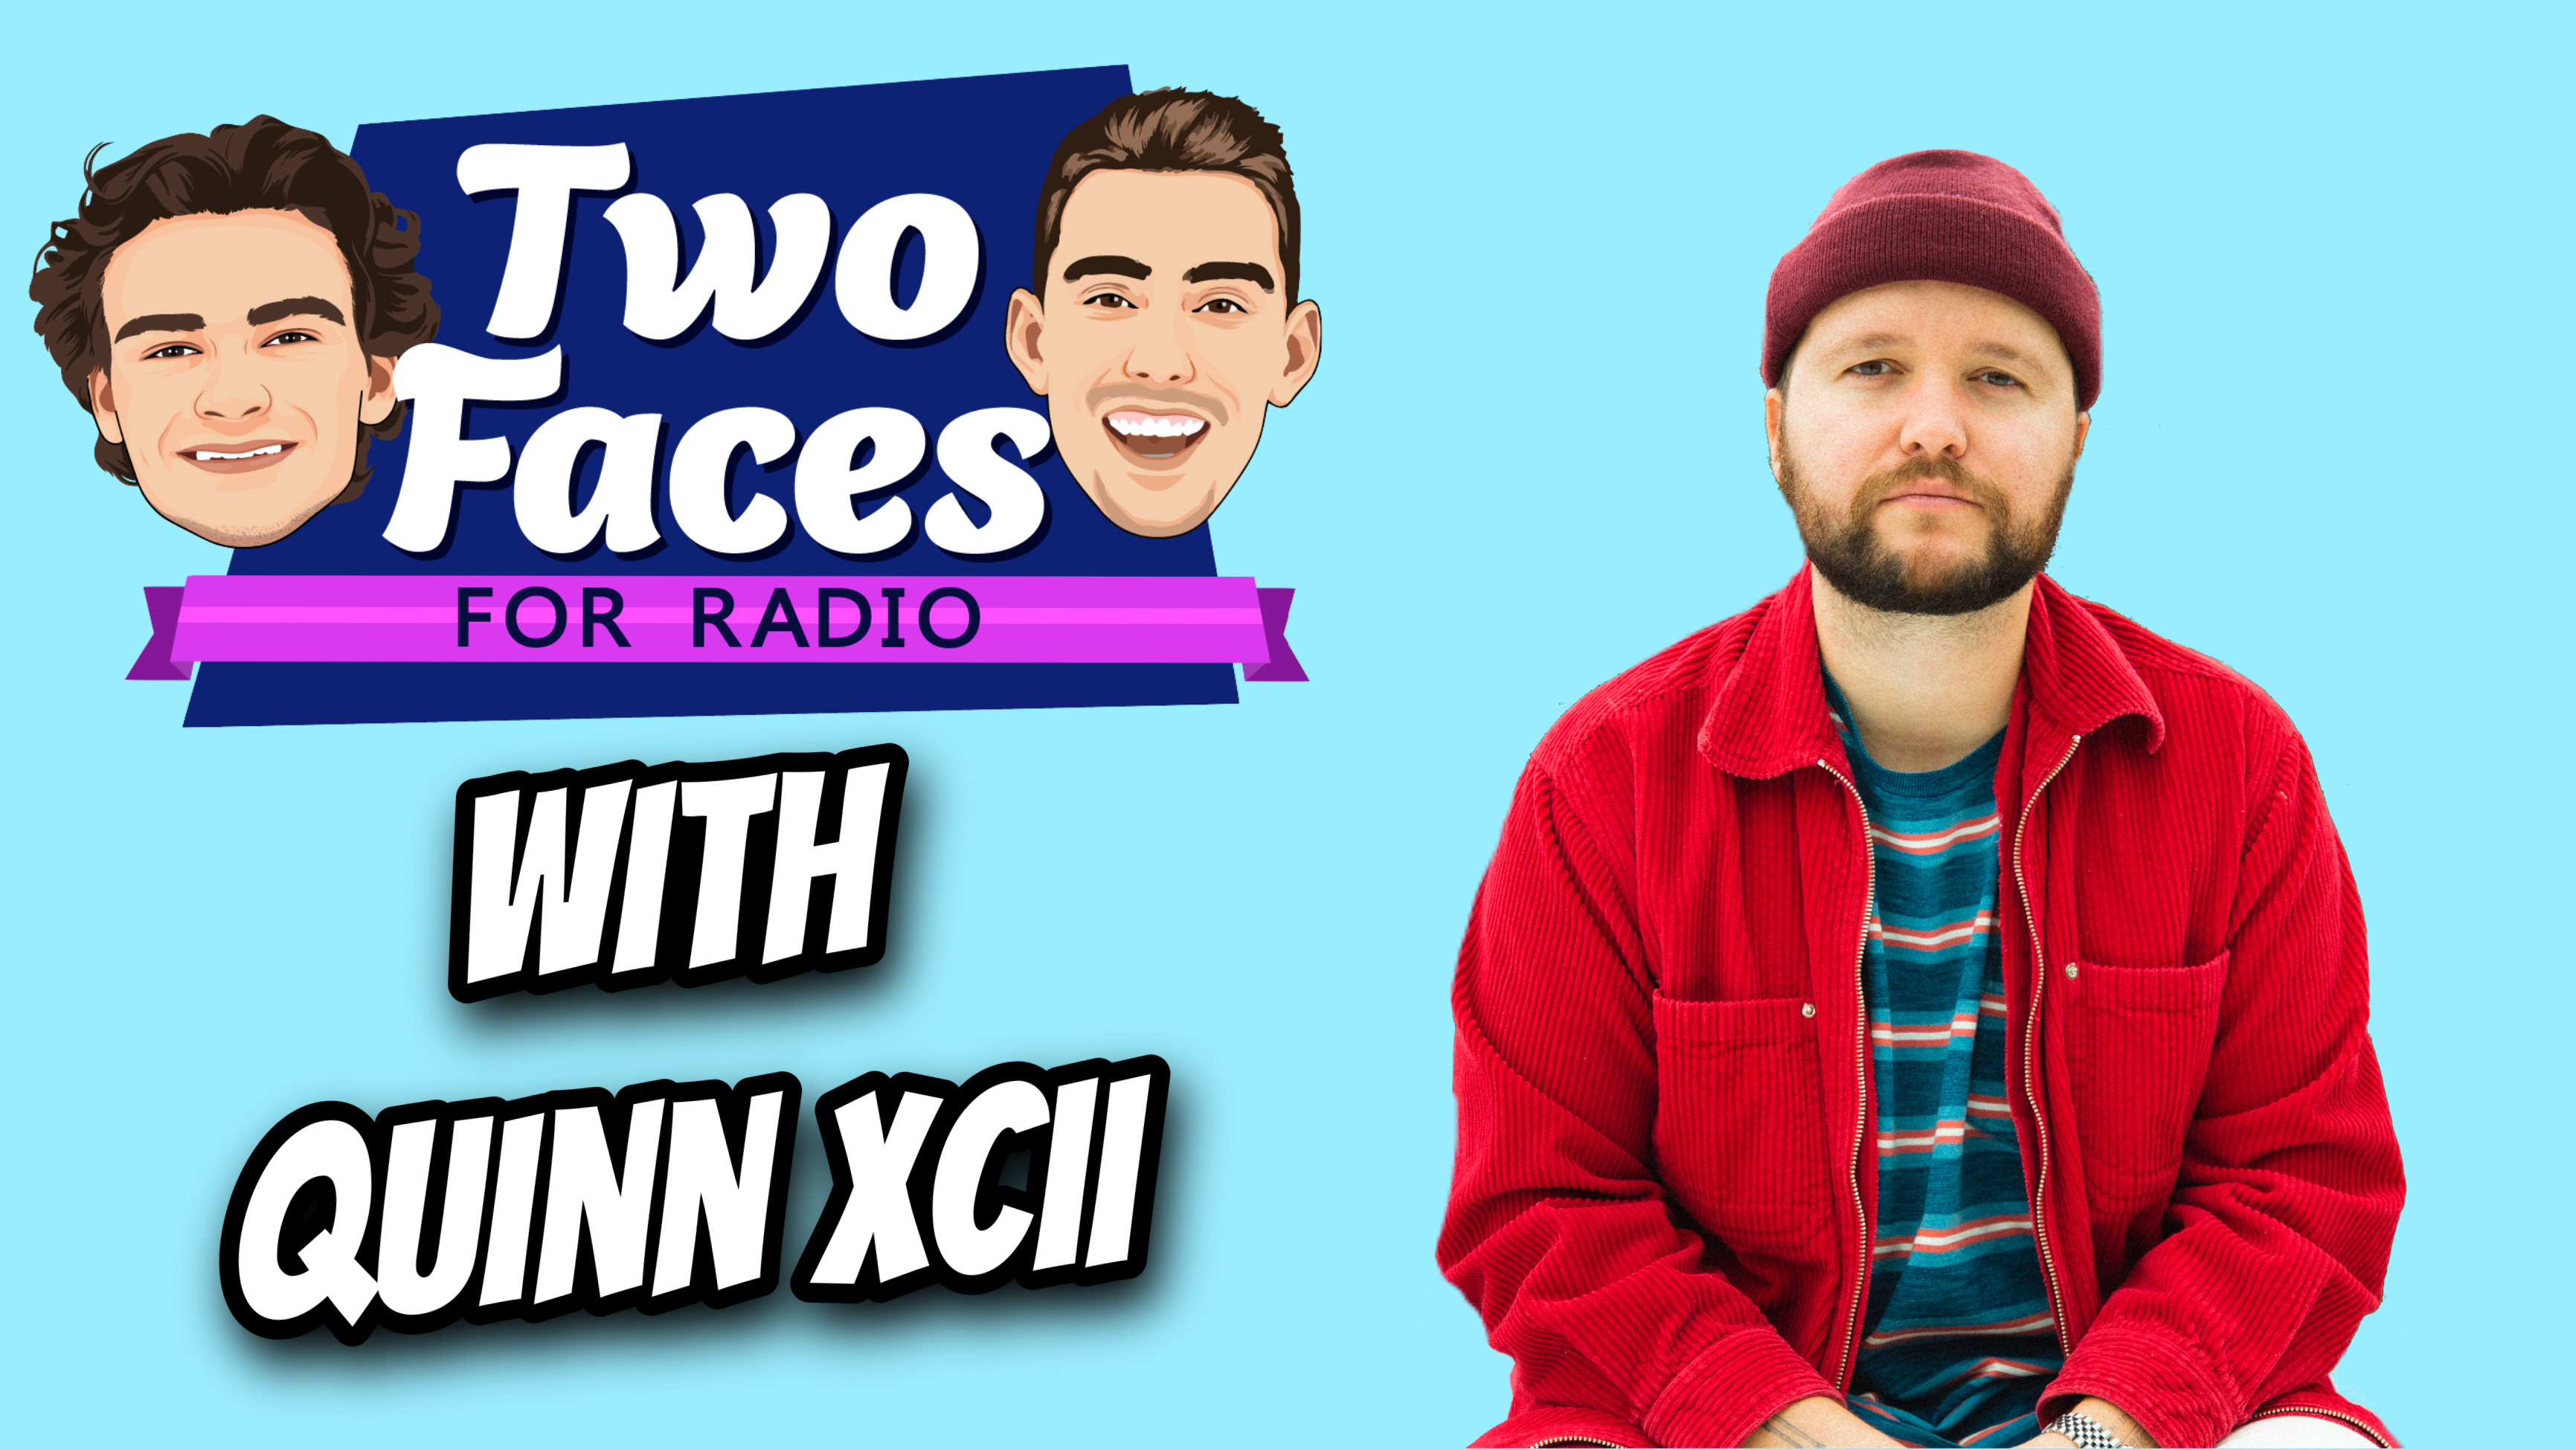 Quinn XCII Joins Two Faces For Radio [WATCH]